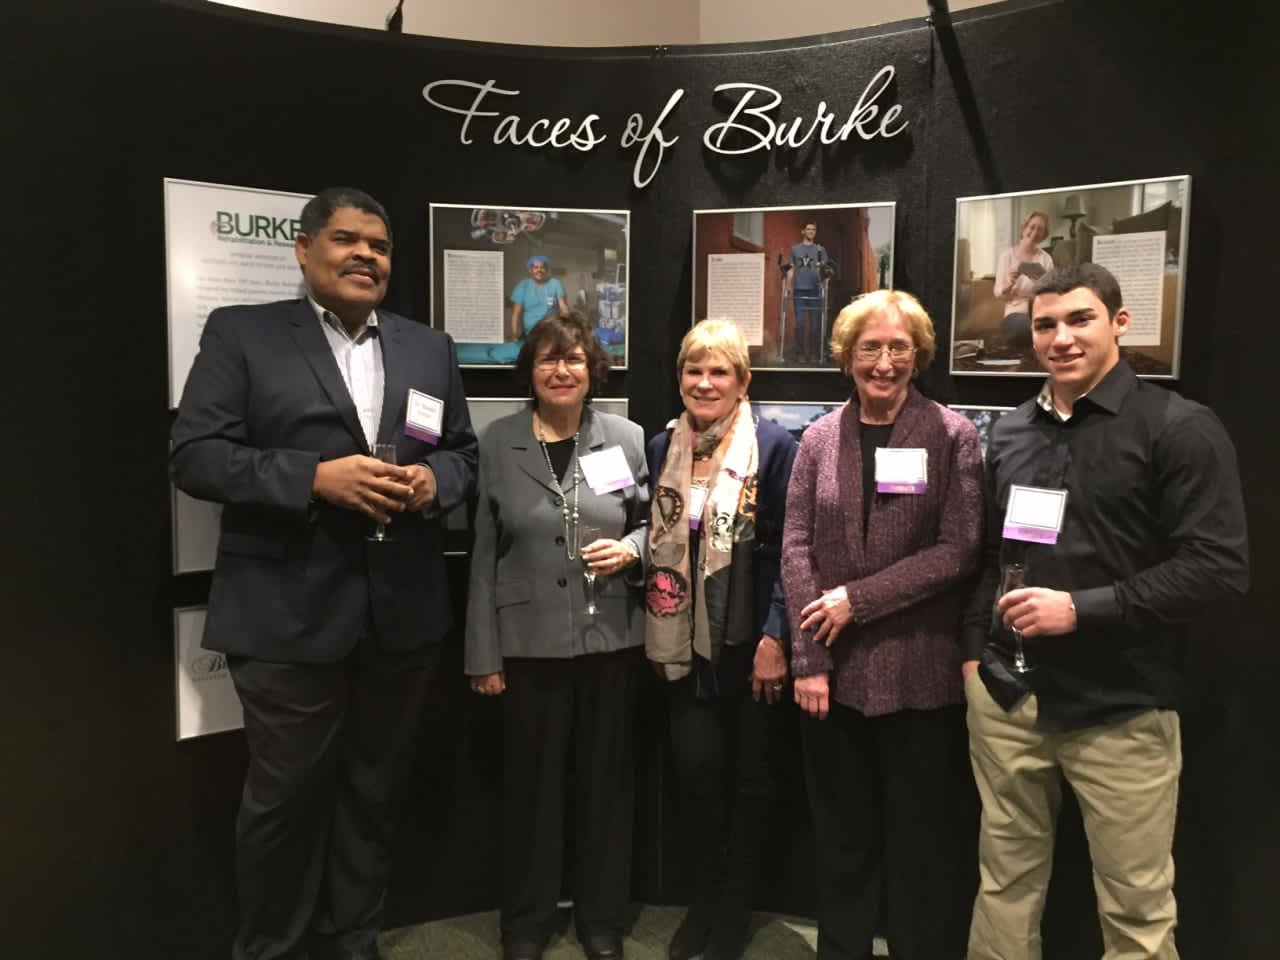 Five of the Faces of Burke participants (from left to right): Dr. Ronald Verrier of Long Island, Barbara Kessler of Scarsdale, Barbara Baratta of Greenwich, Susan Rice of Yonkers and Max Gomez of New Rochelle.